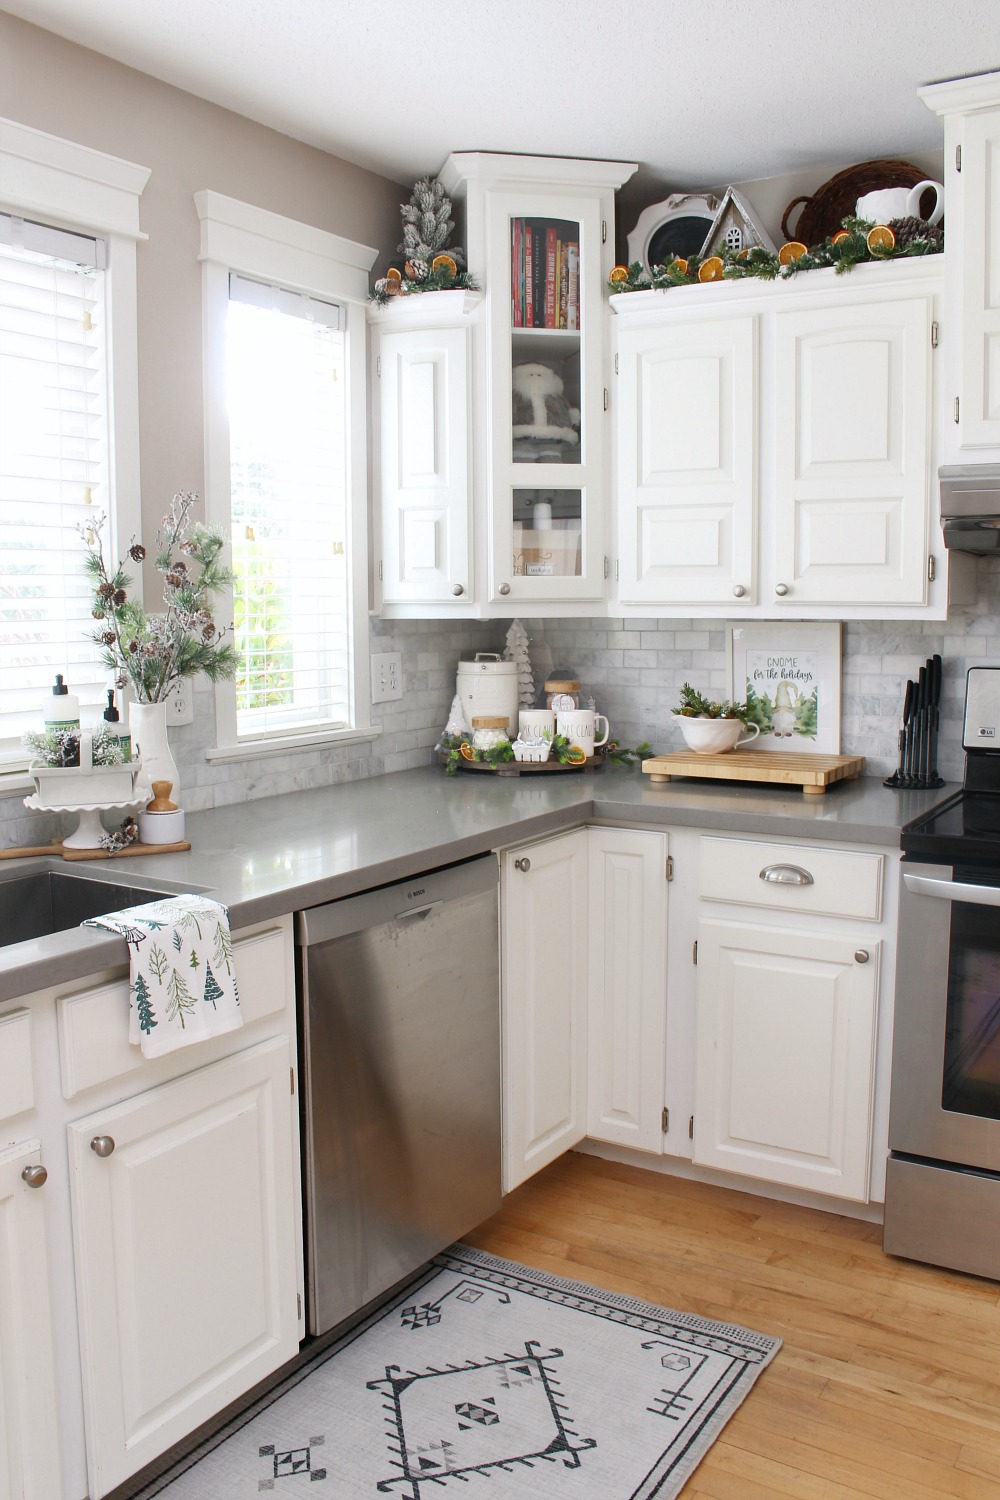 CLASSIC + CHIC SPRING KITCHEN DECOR - CITRINELIVING